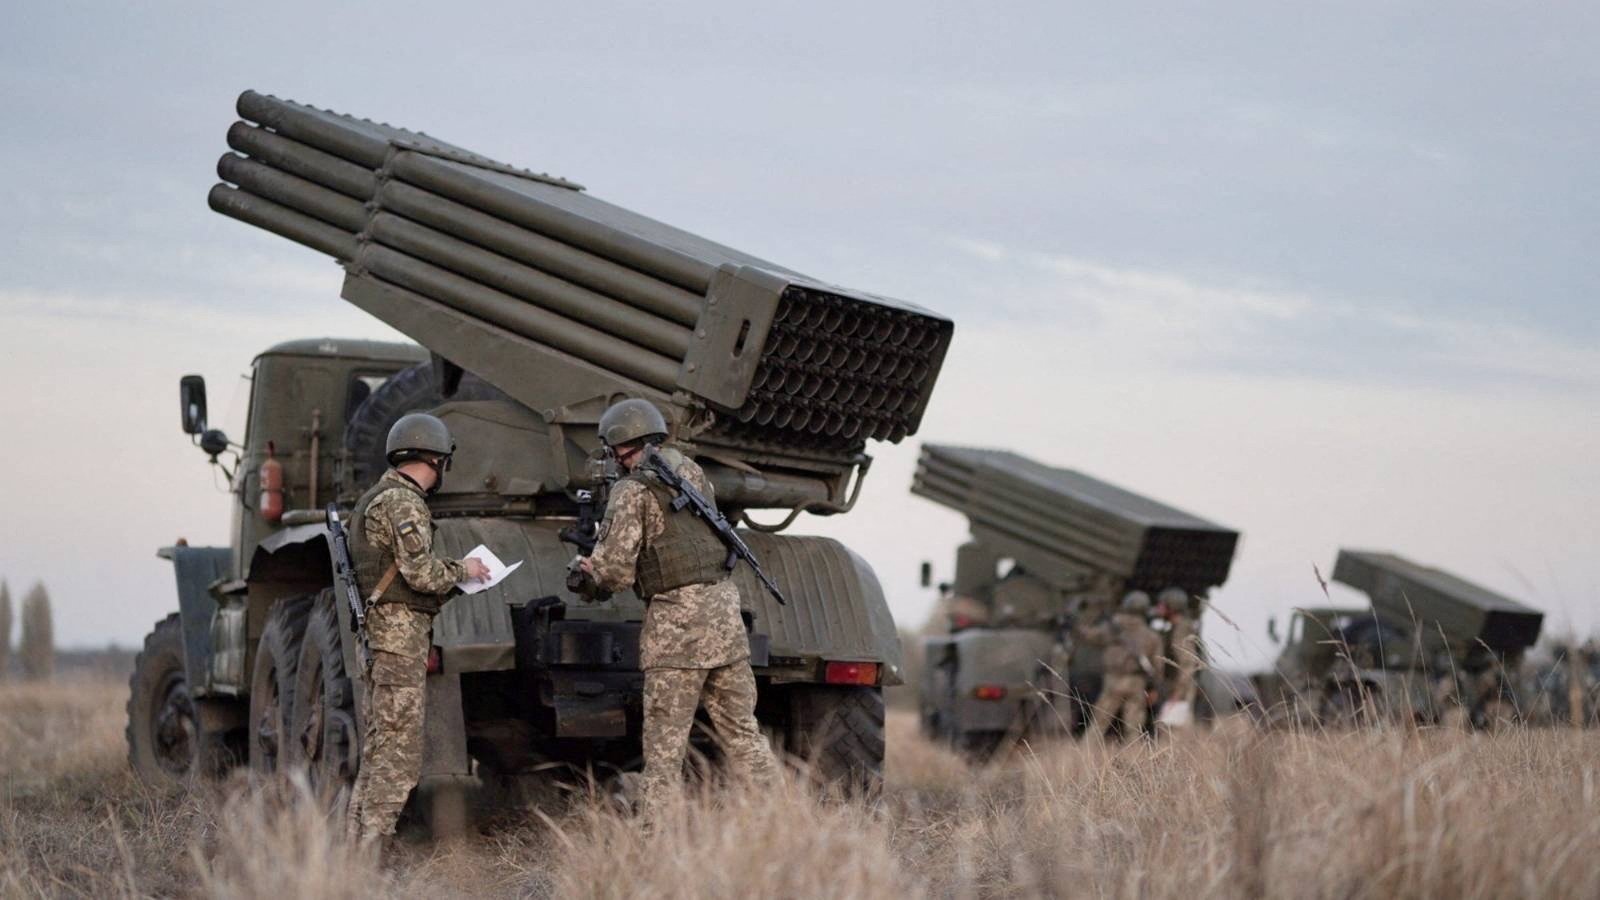 Service members of the Ukrainian Armed Forces gather near BM-21 "Grad" multiple rocket launchers during tactical military exercises at a shooting range in the Kherson region, Ukraine, January 19, 2022. (REUTERS Photo)